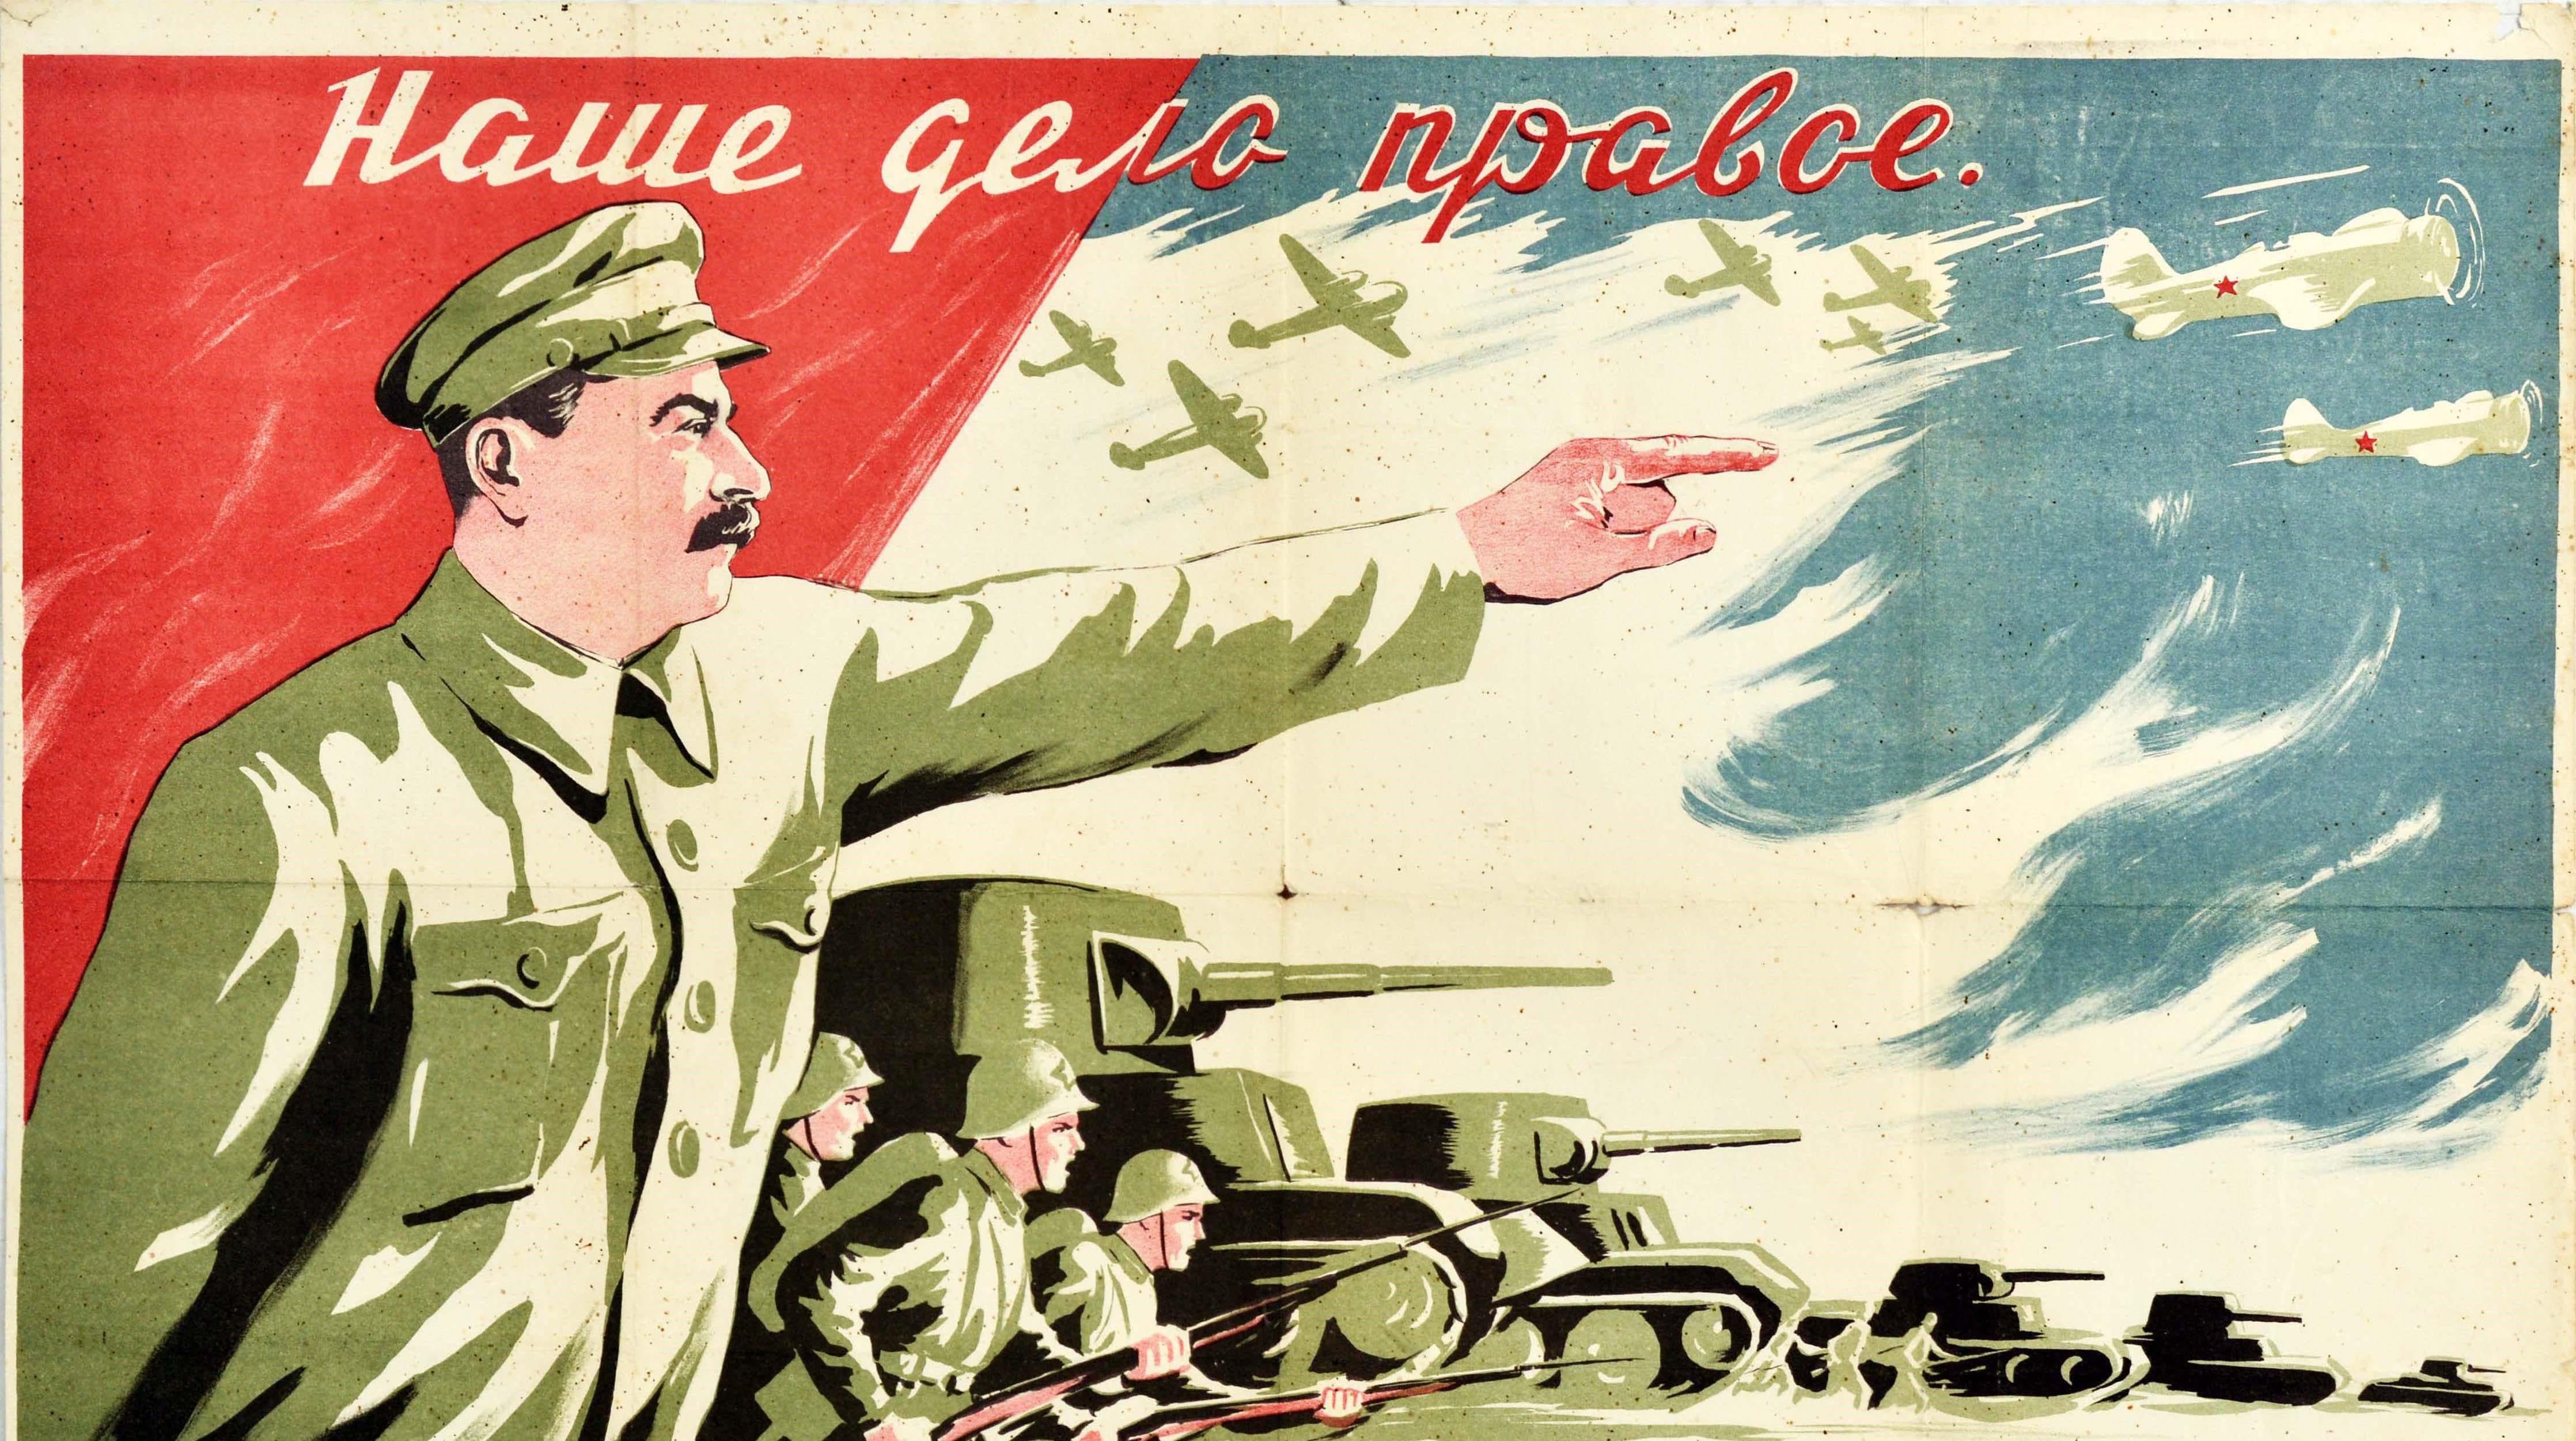 Original vintage World War Two propaganda poster - Our cause is right The enemy will be destroyed Victory will be ours - featuring an image of Stalin pointing forward in front of a red flag with military troops going into battle in the background,